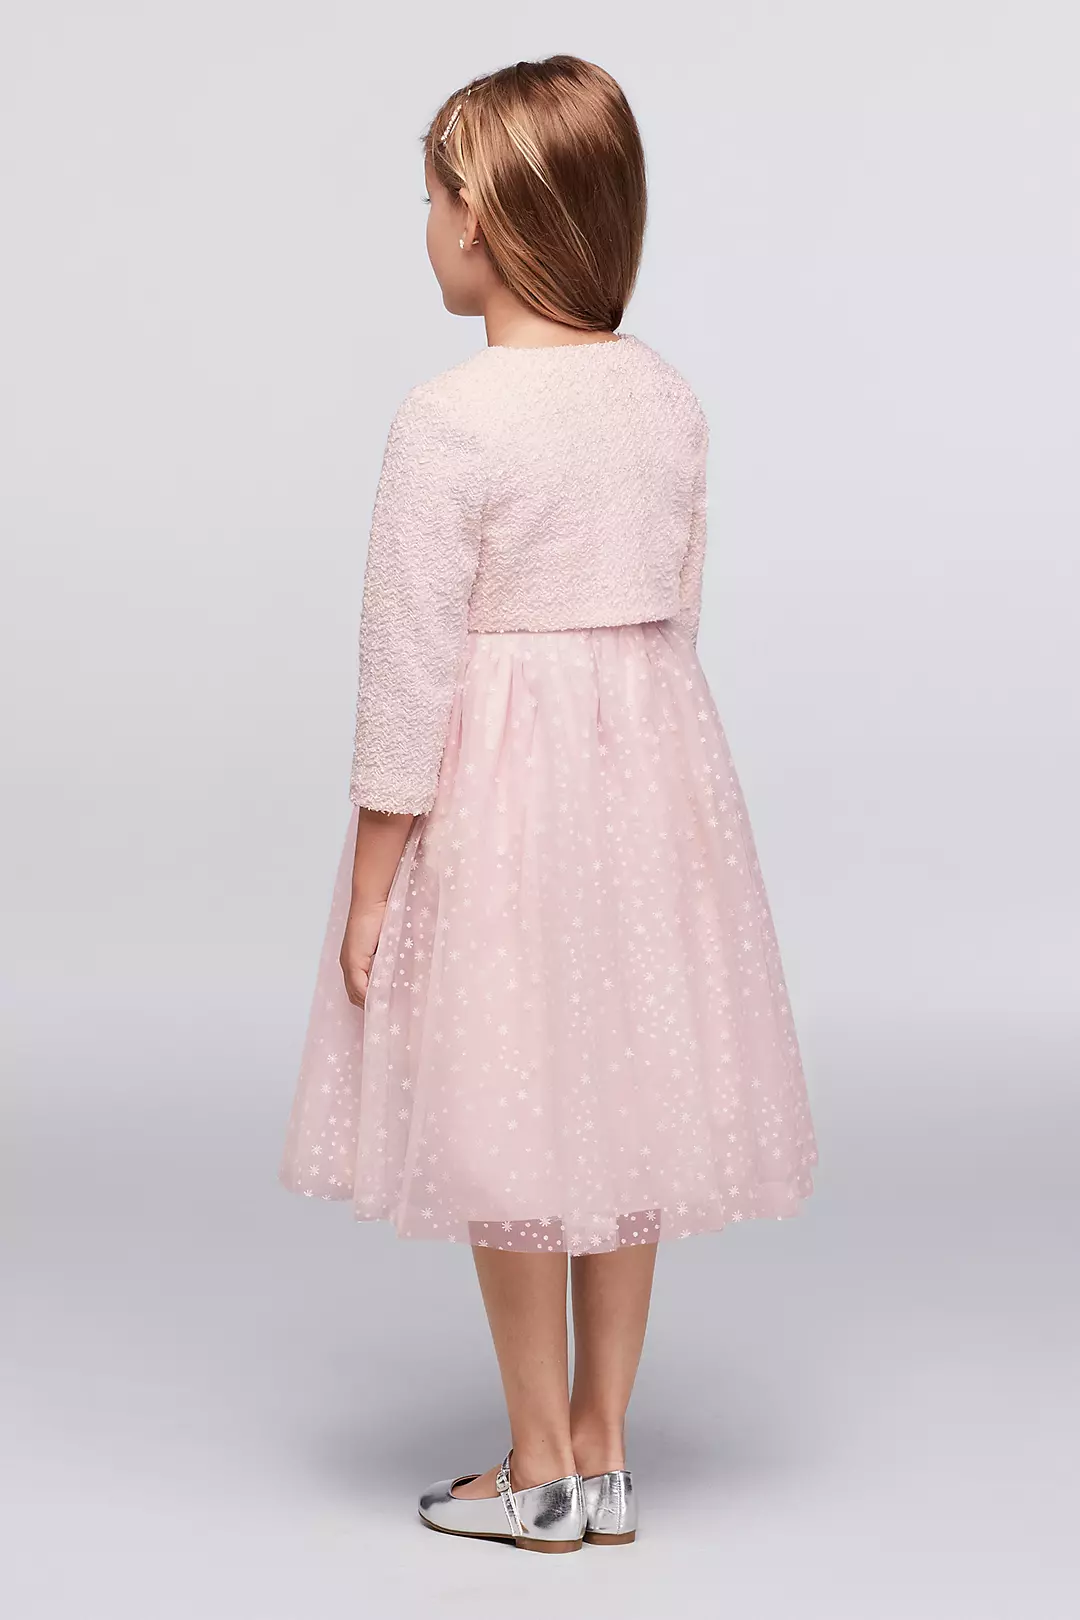 Snowflake Tulle Dress with Fuzzy Cardigan Image 2